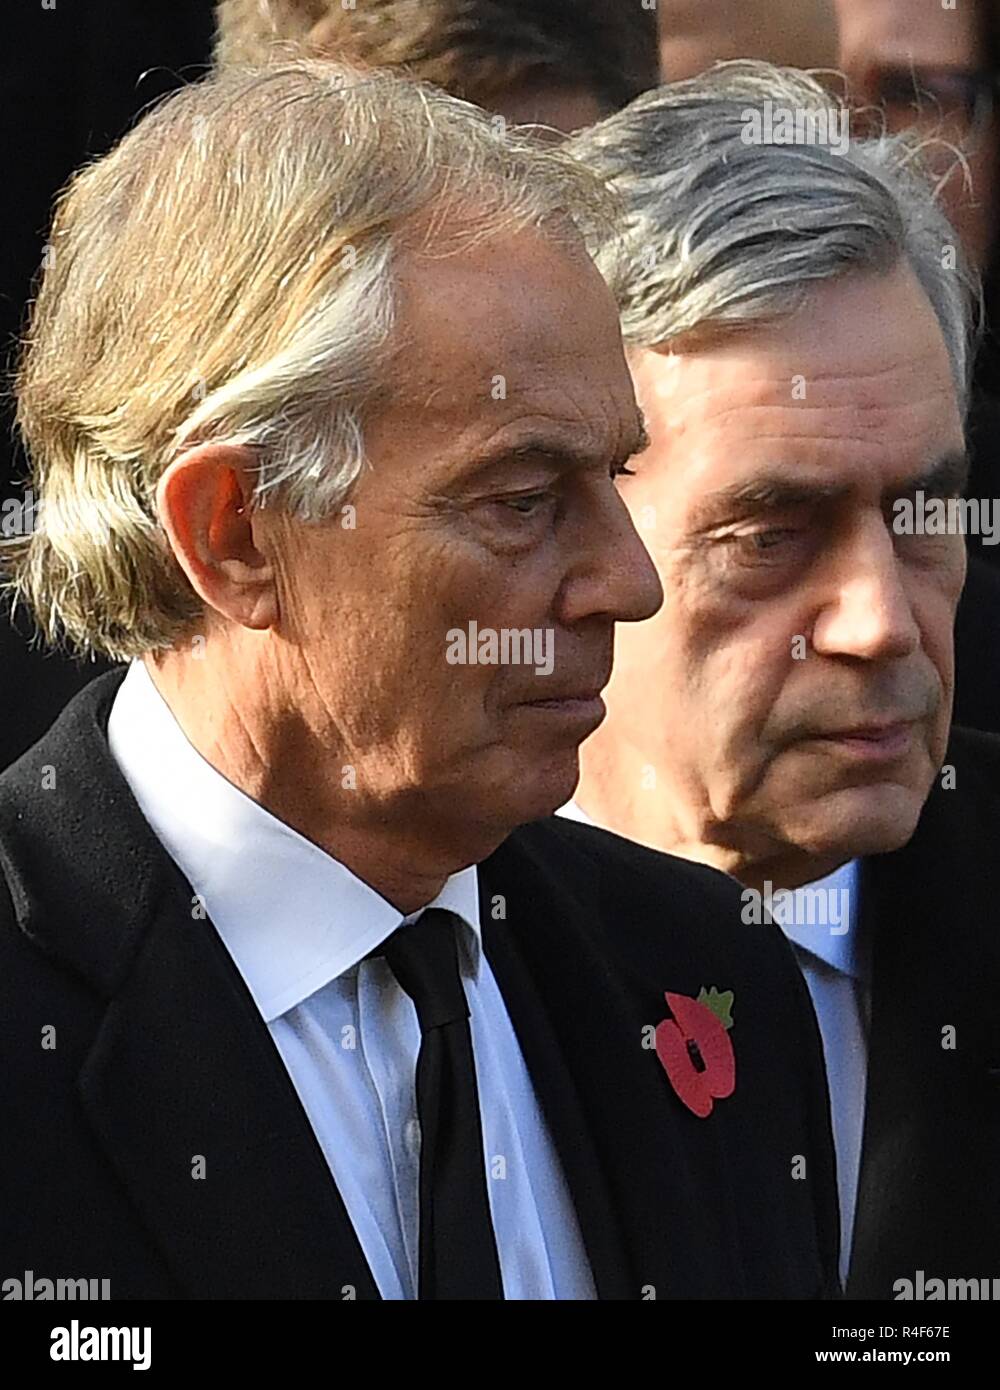 11/11/2018. London, United Kingdom. Remembrance Sunday and the Centenary of the Armistice. Former Prime Ministers David Cameron, Tony Blair and Gordon Brown   join Queen Elizabeth II accompanied by members of the  Royal family including Prince Charles, Prince of Wales and Camilla, The Duchess of Cornwall,  Prince William, Duke of Cambridge and Catherine, The  Duchess of Cambridge,  Prince Harry, The Duke of Sussex and Meghan, The Duchess of Sussex , attend the Remembrance Sunday service at The Cenotaph in central London on  the Centenary of the end of the First World War.  Picture by Andrew Pa Stock Photo